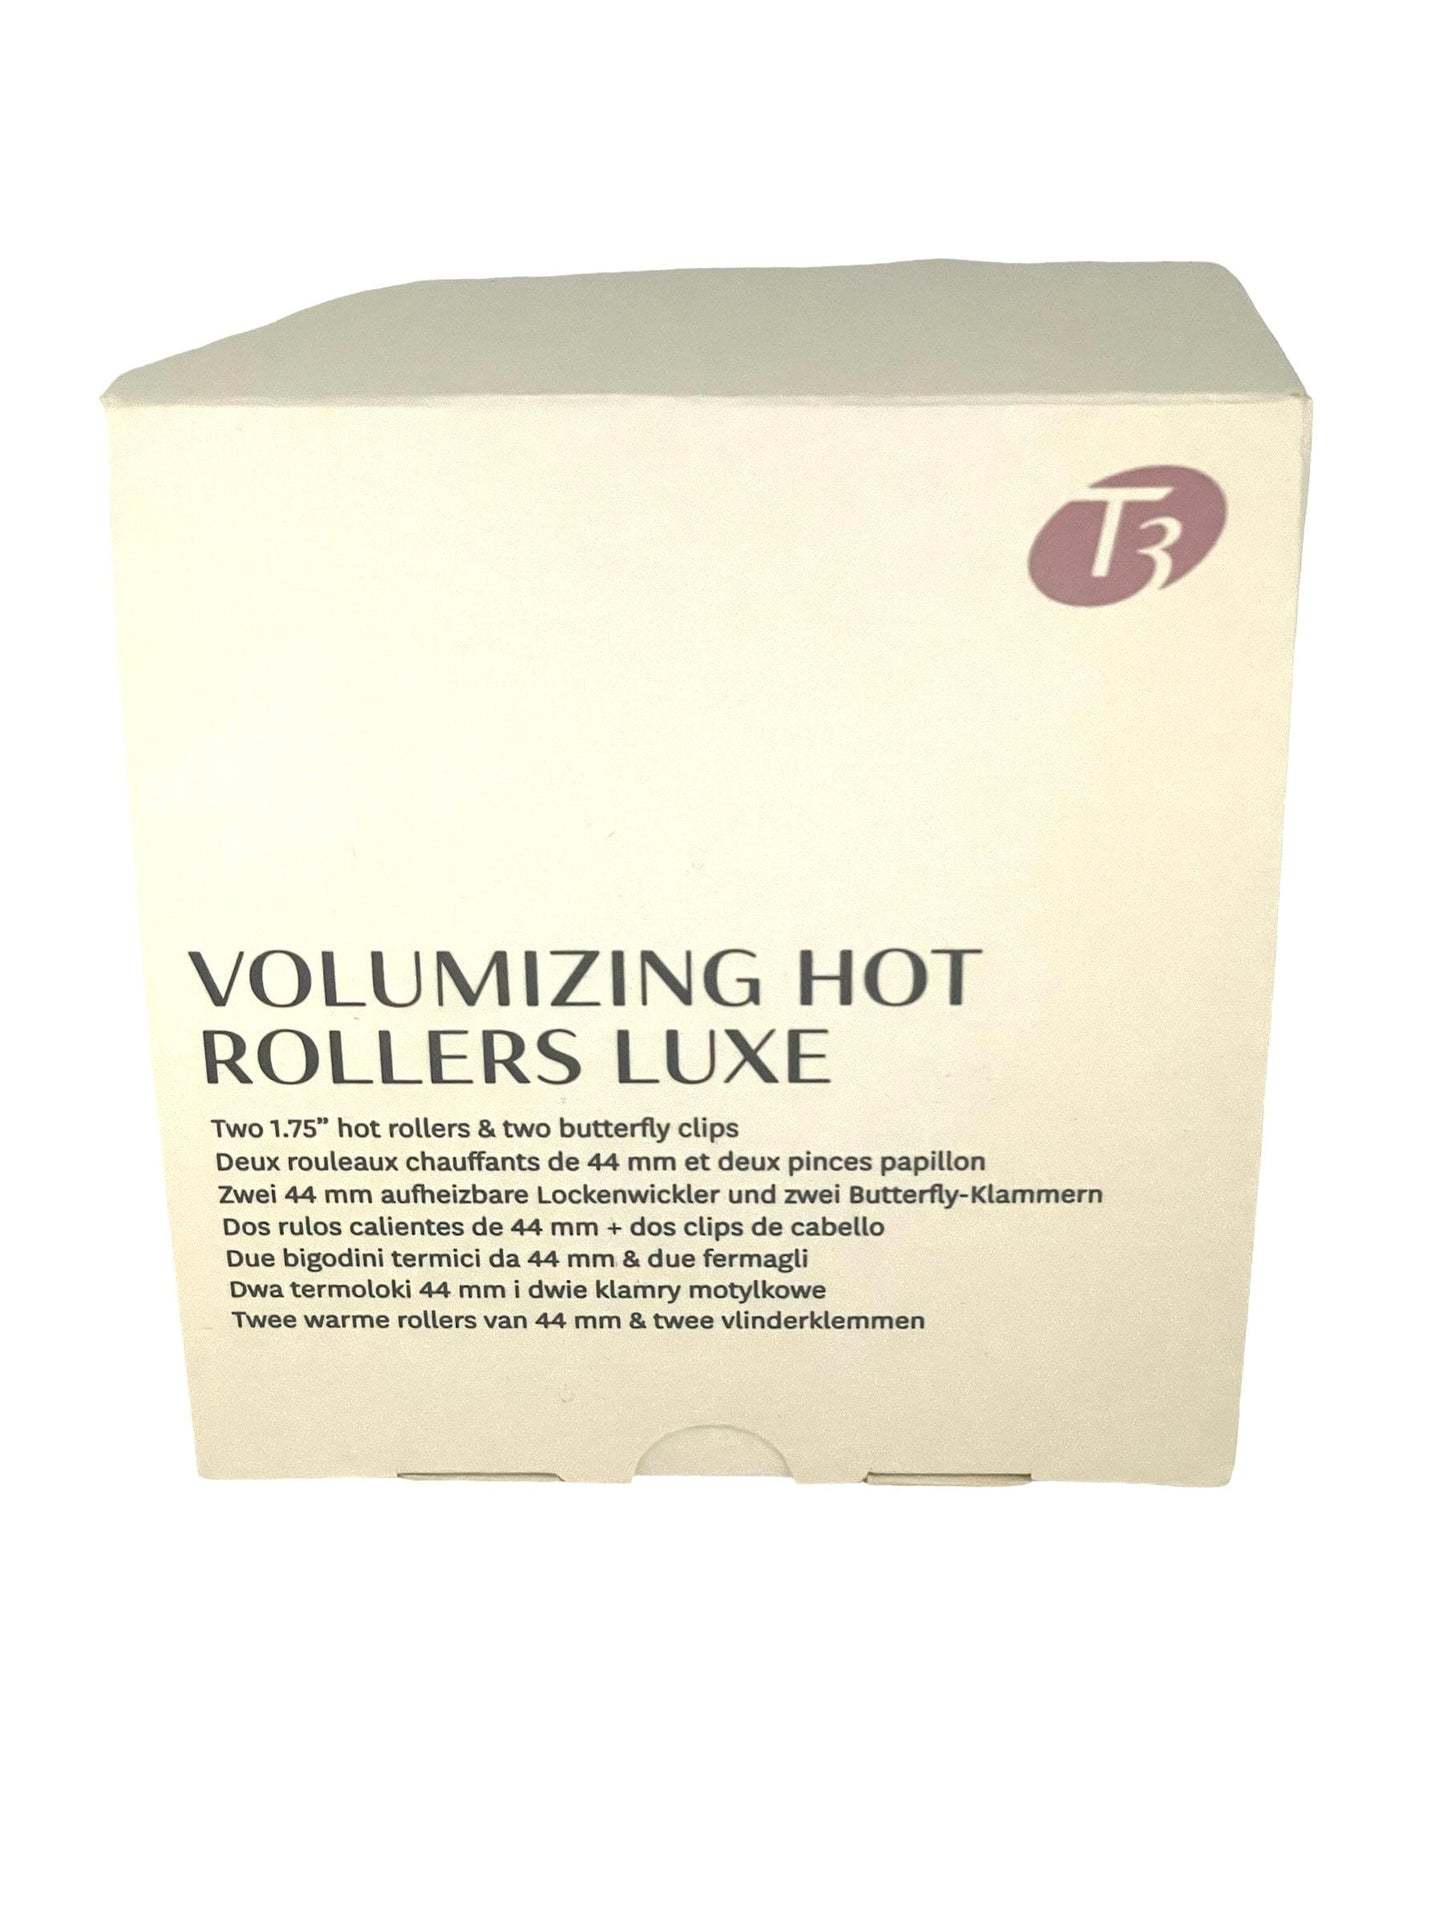 T3 Micro Hot Rollers Replacement Rollers Luxe 4 Sizes - 2pk Each